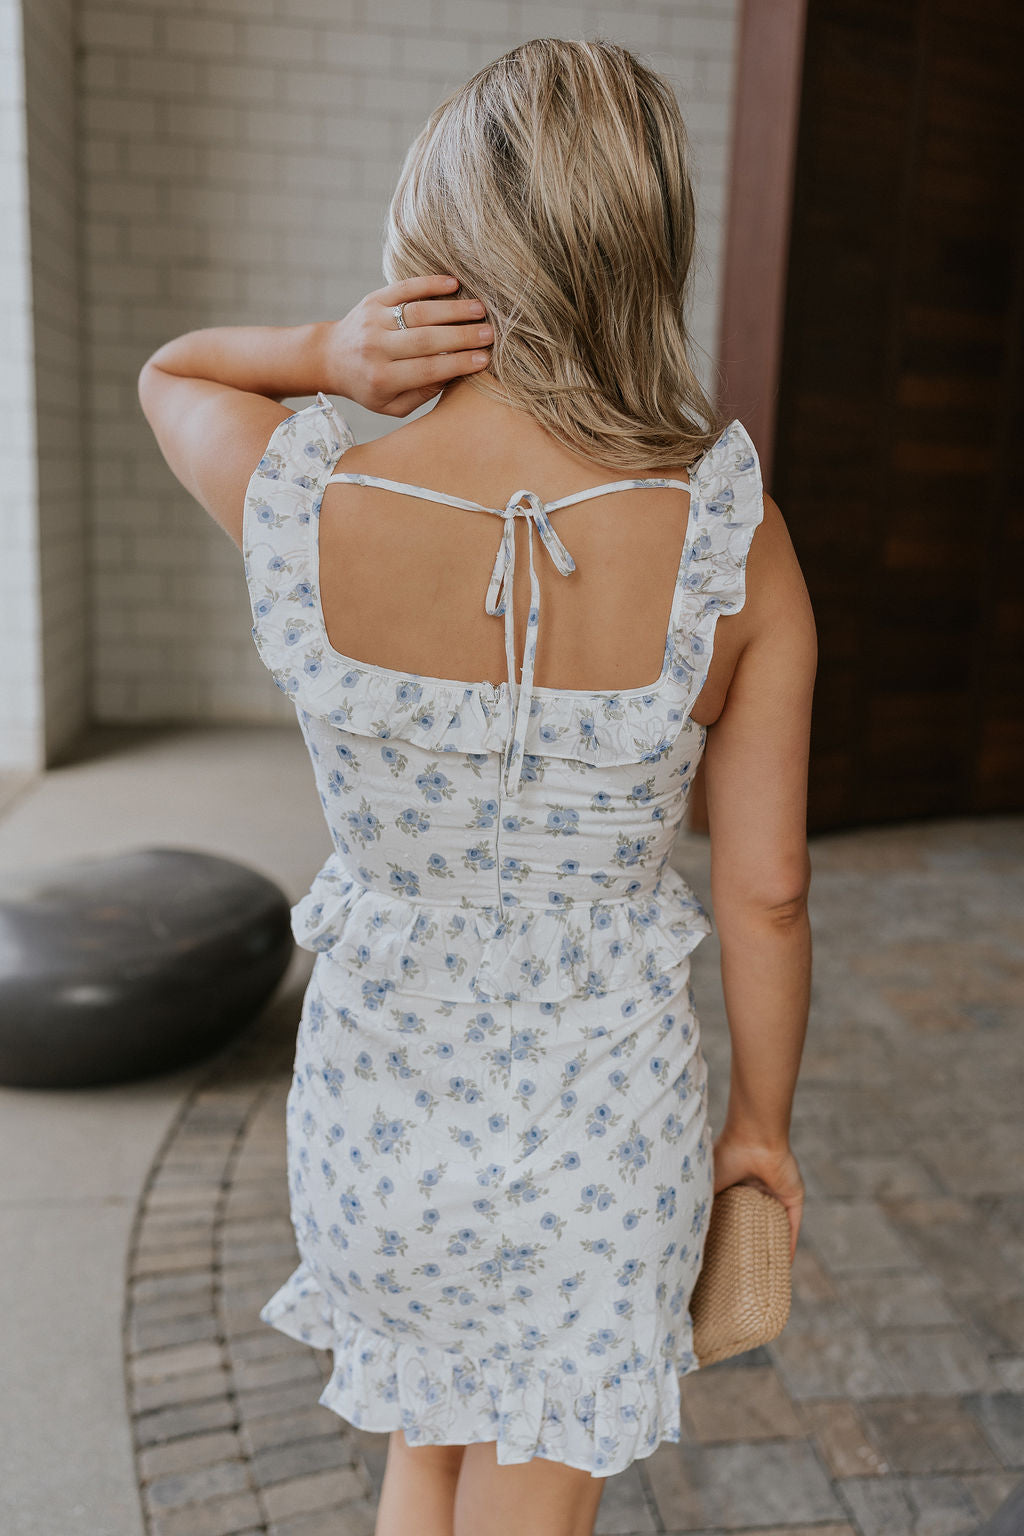 Back view of female model wearing the Emerson White Blue Floral Ruffle Mini Dress which features White Lightweight Fabric, Blue Floral Print, Ruffle Hem Design, Square Neckline and sleeveless